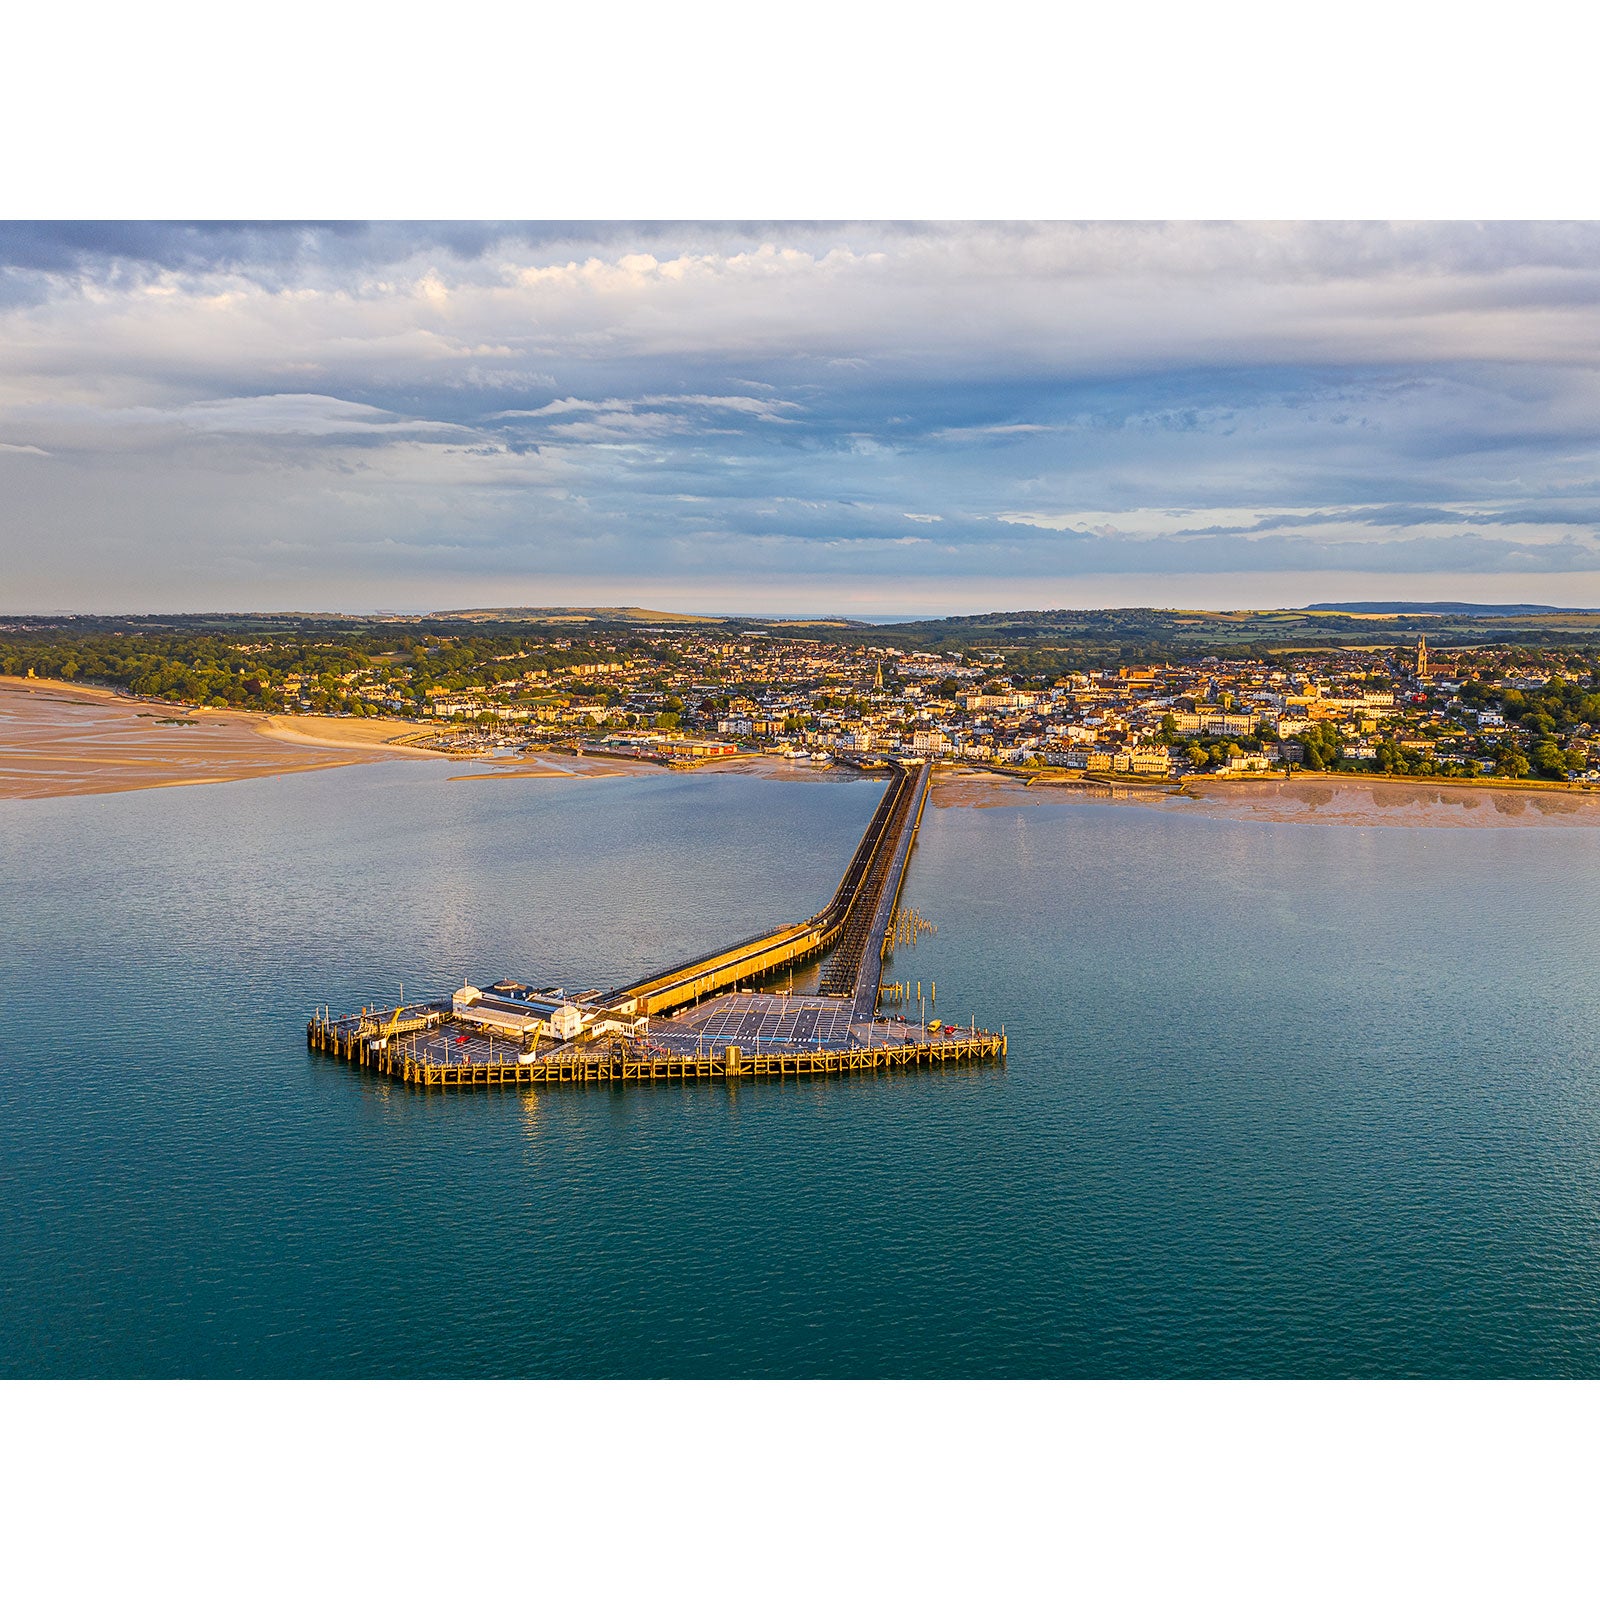 Aerial view of Ryde, a coastal town on the Isle of Wight with a long pier extending into the sea, captured by Available Light Photography.